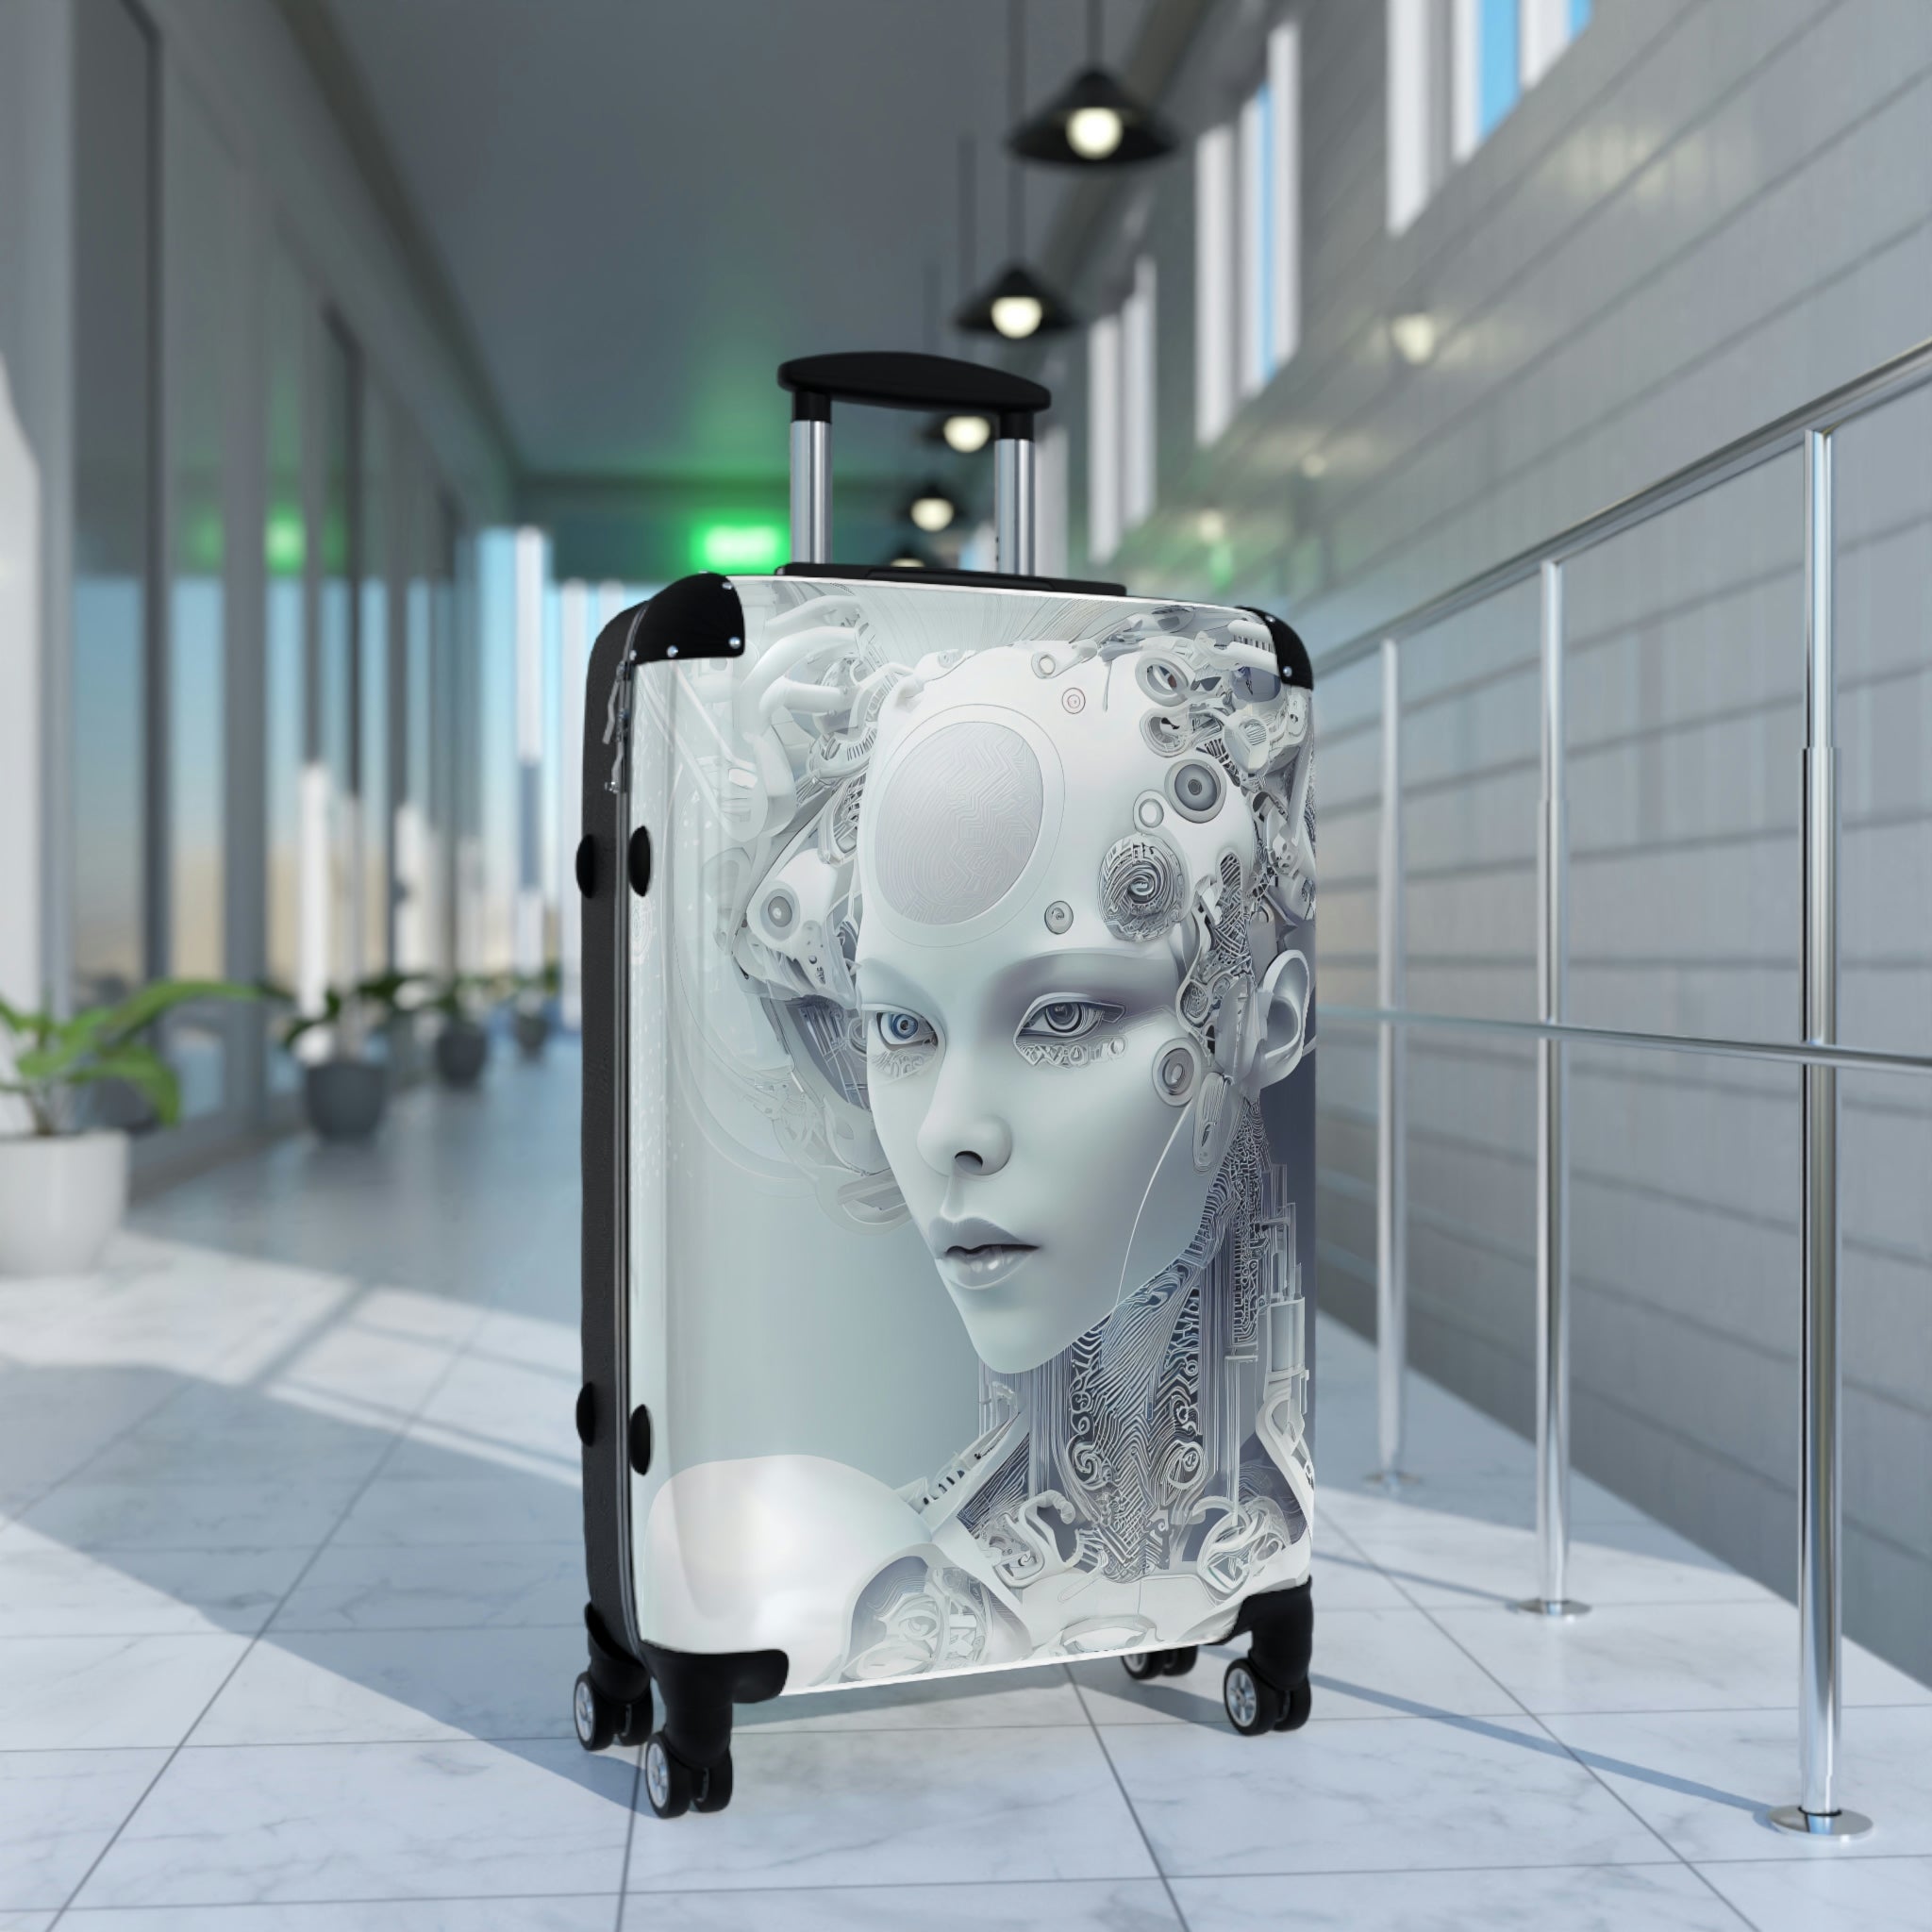 The Future is NOW! (Hers) - Travel Suitcase